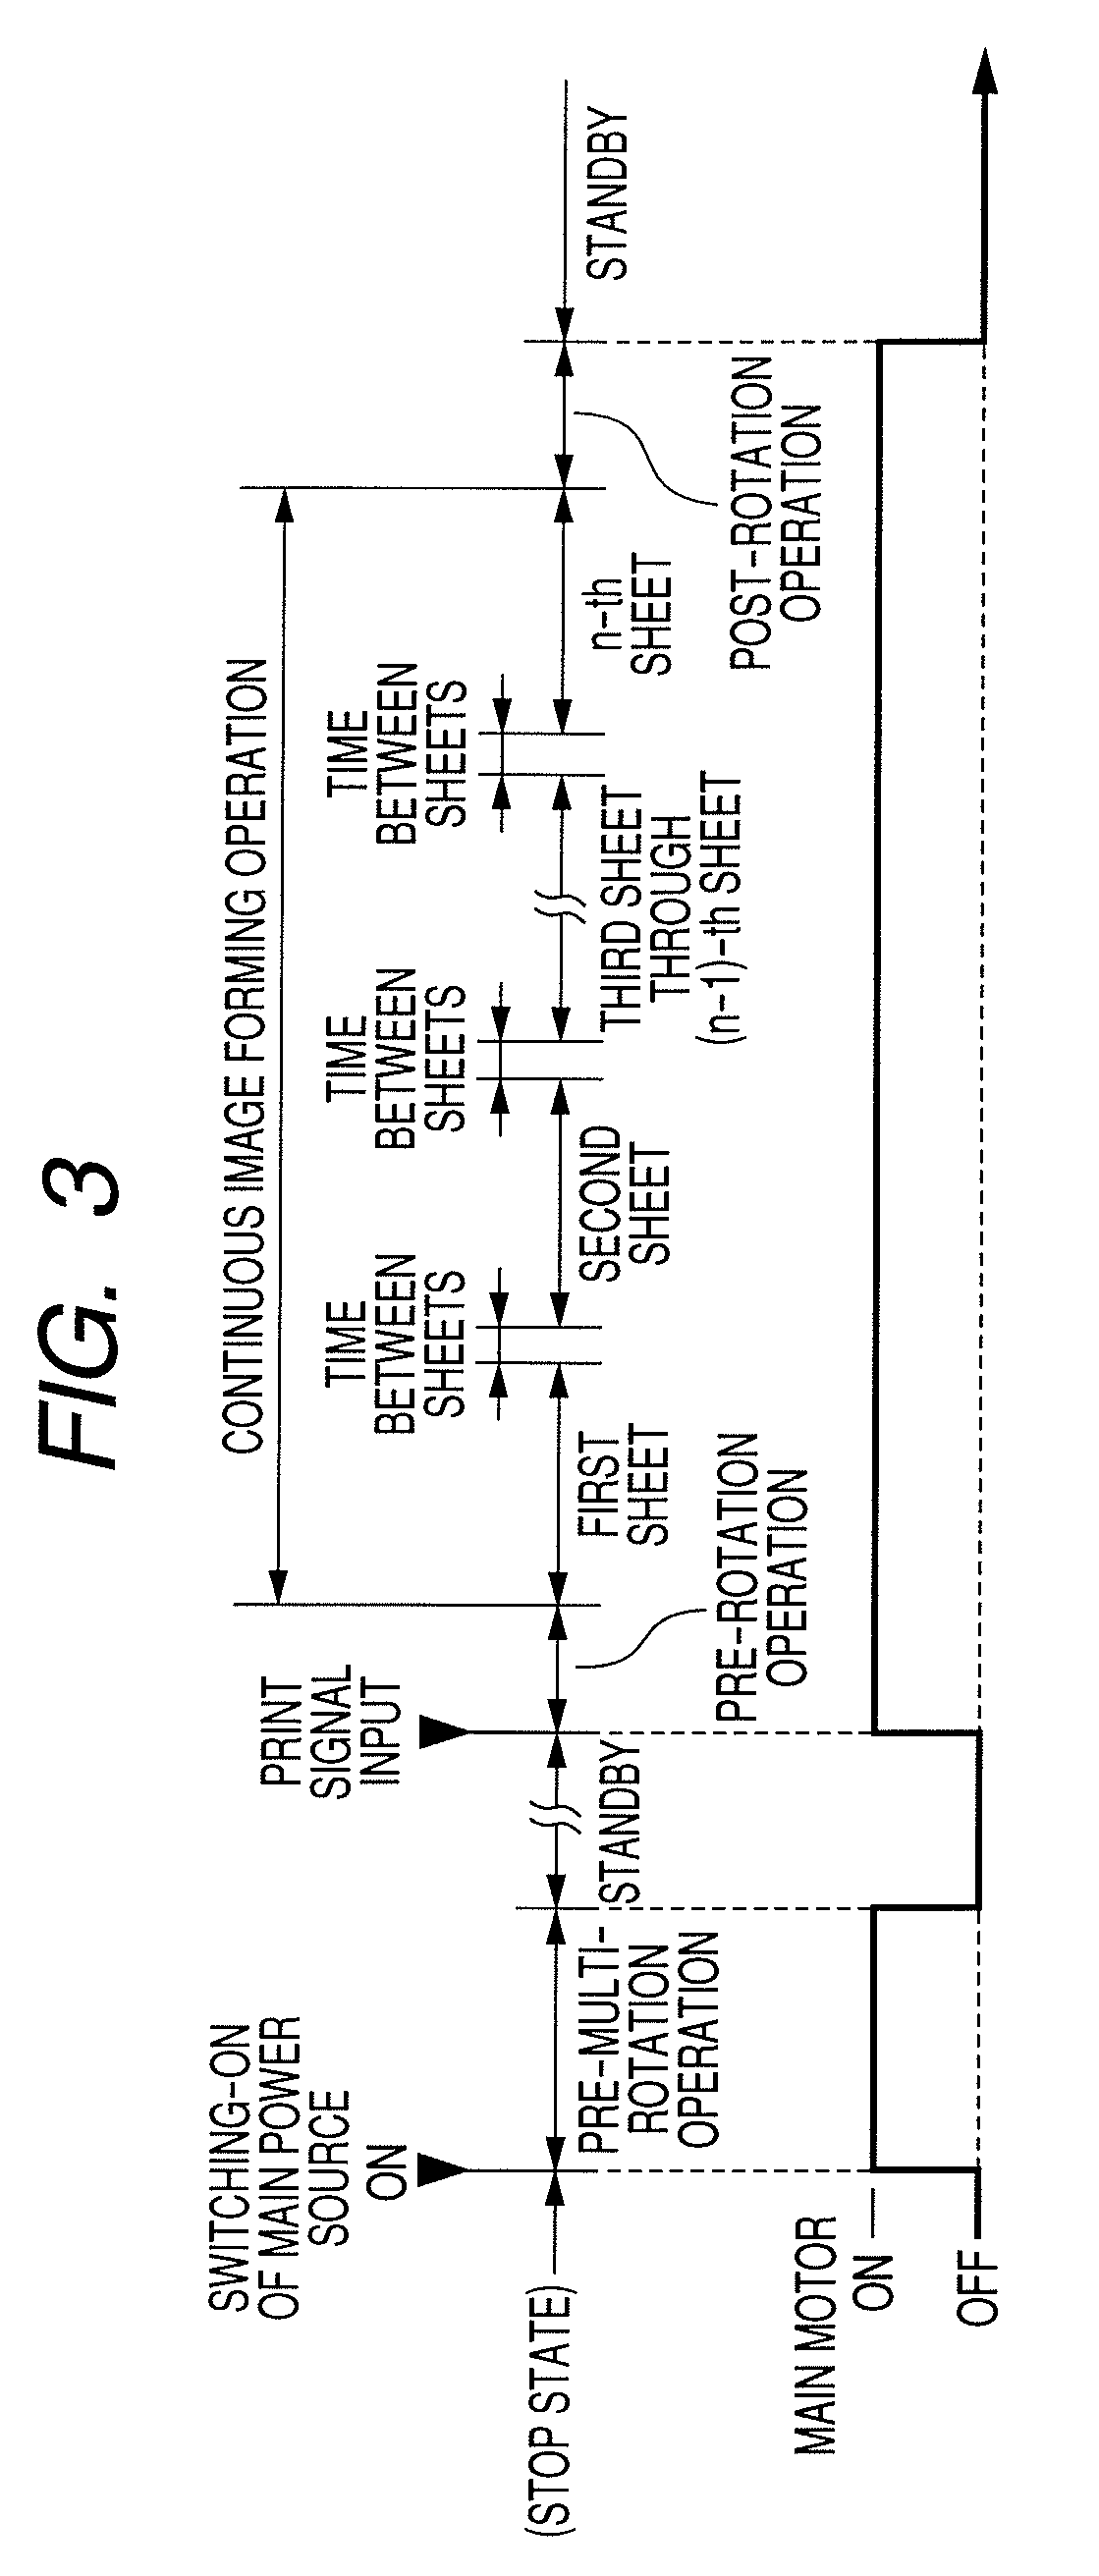 Image forming apparatus with a pre-exposure light control feature